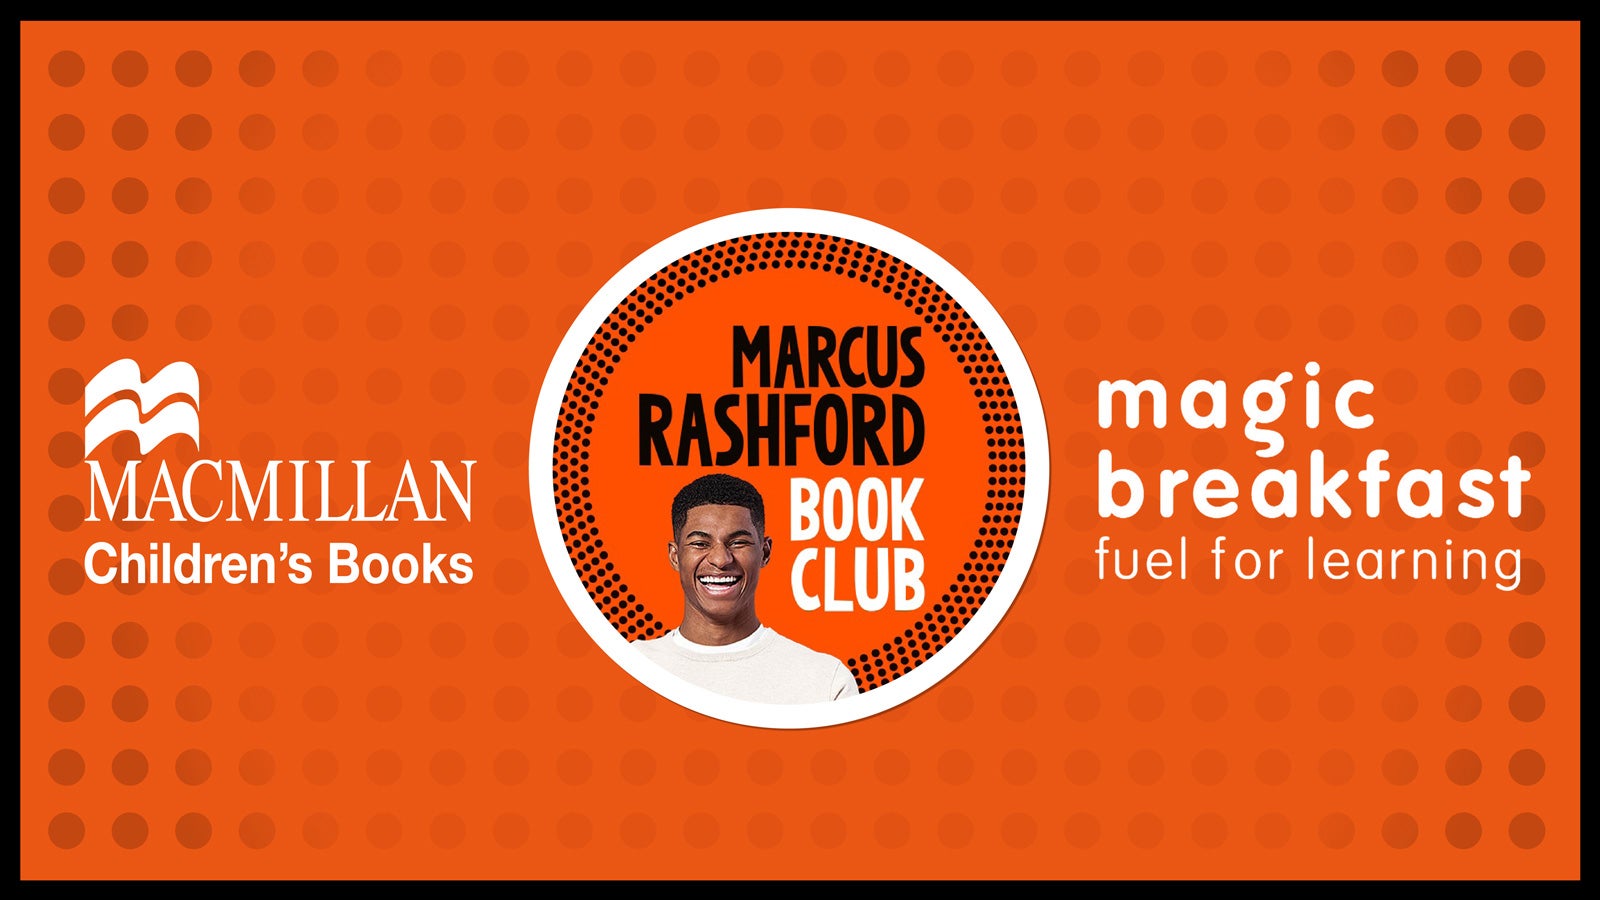 the marcus rashford book club logo - which shows Marcus smiling, with the Macmillan Children's Books logo to its left, and the Magic Breakfast fuel for learning logo to its right